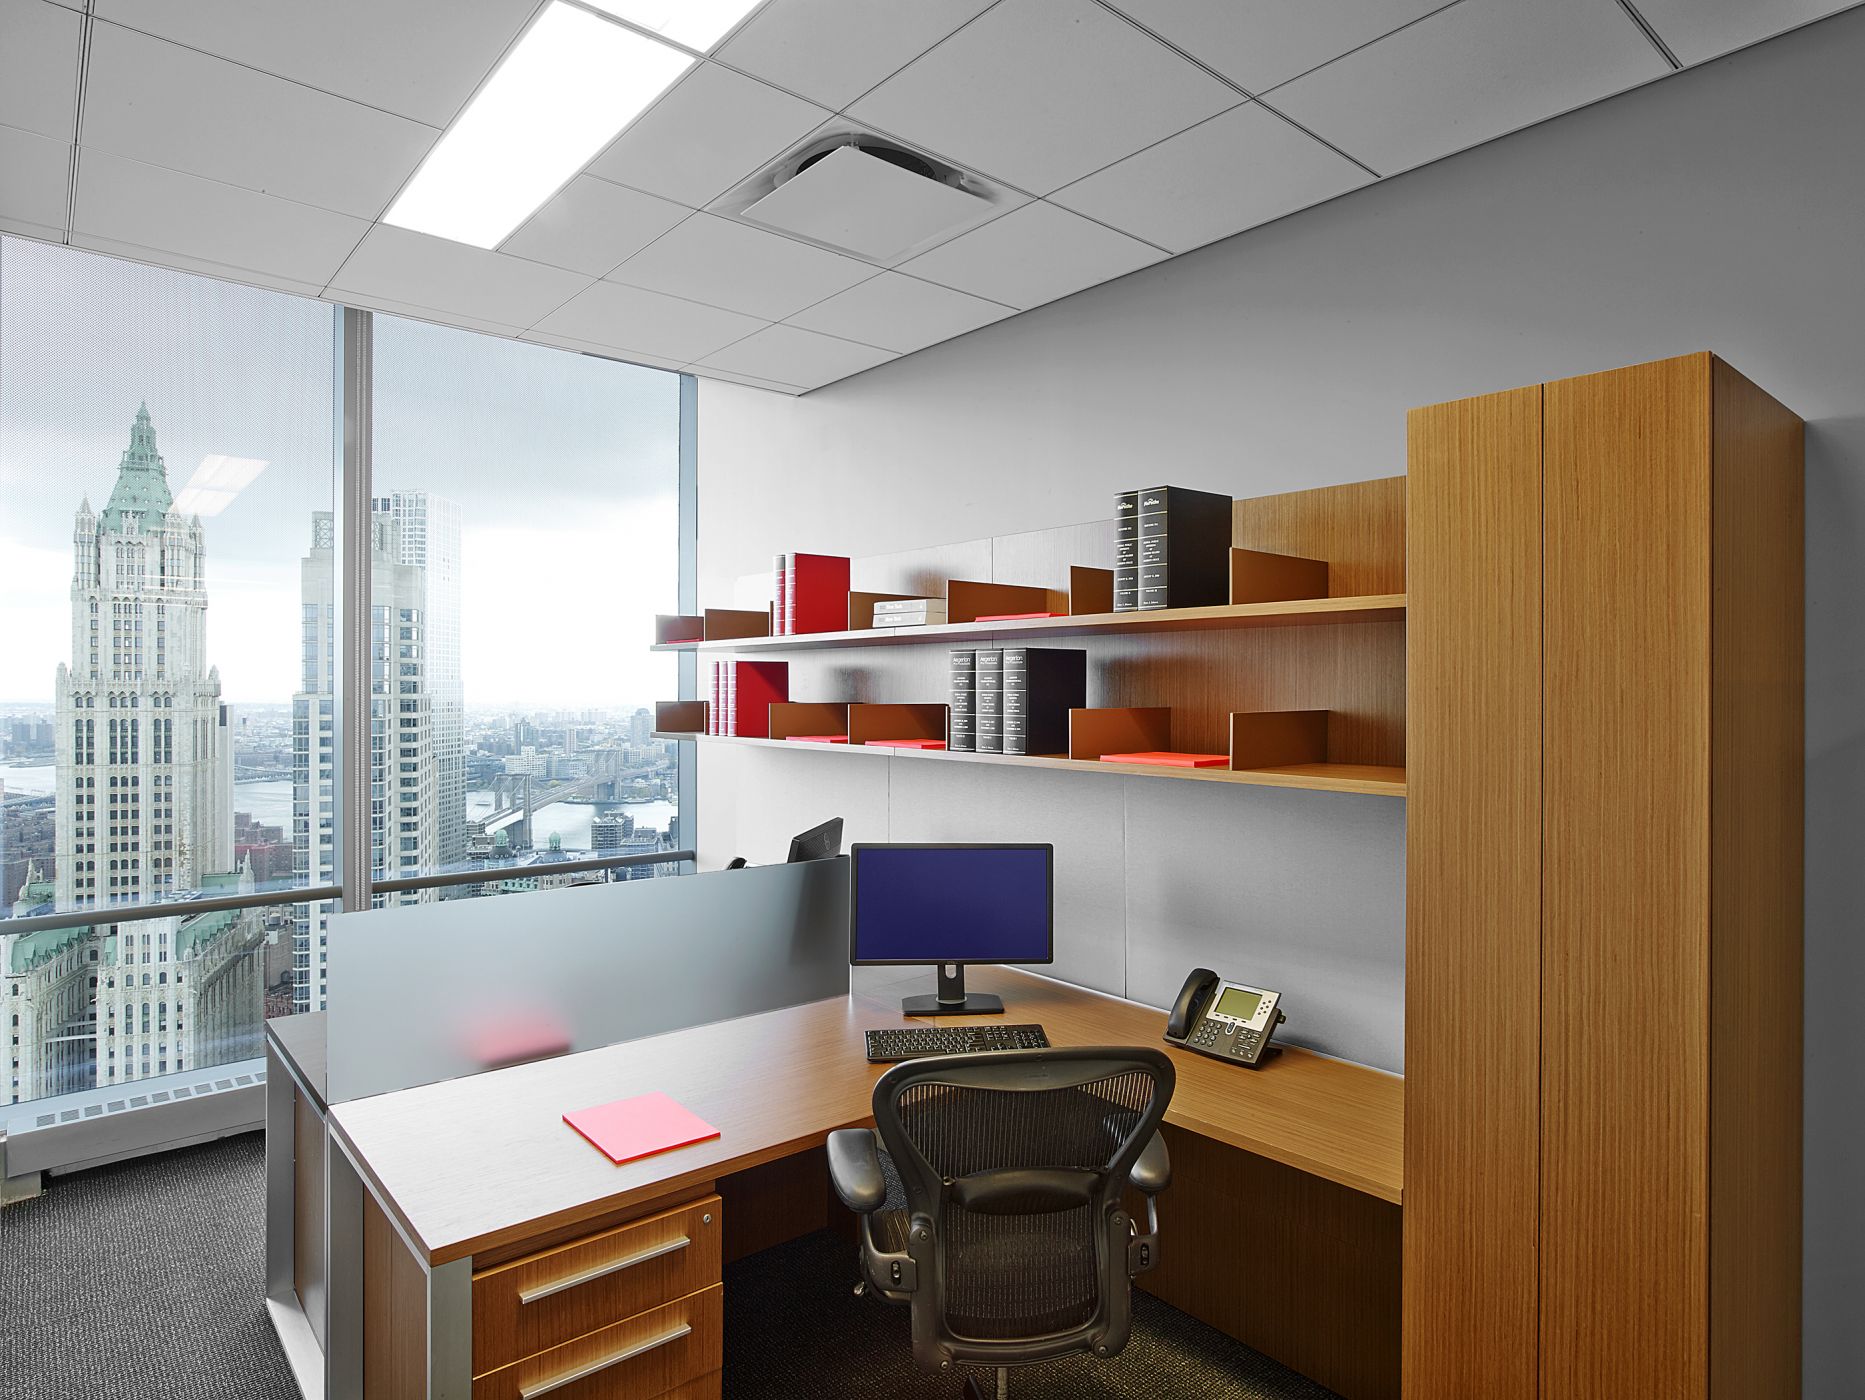 A double associate configuration includes an acrylic panel to divide shared space.